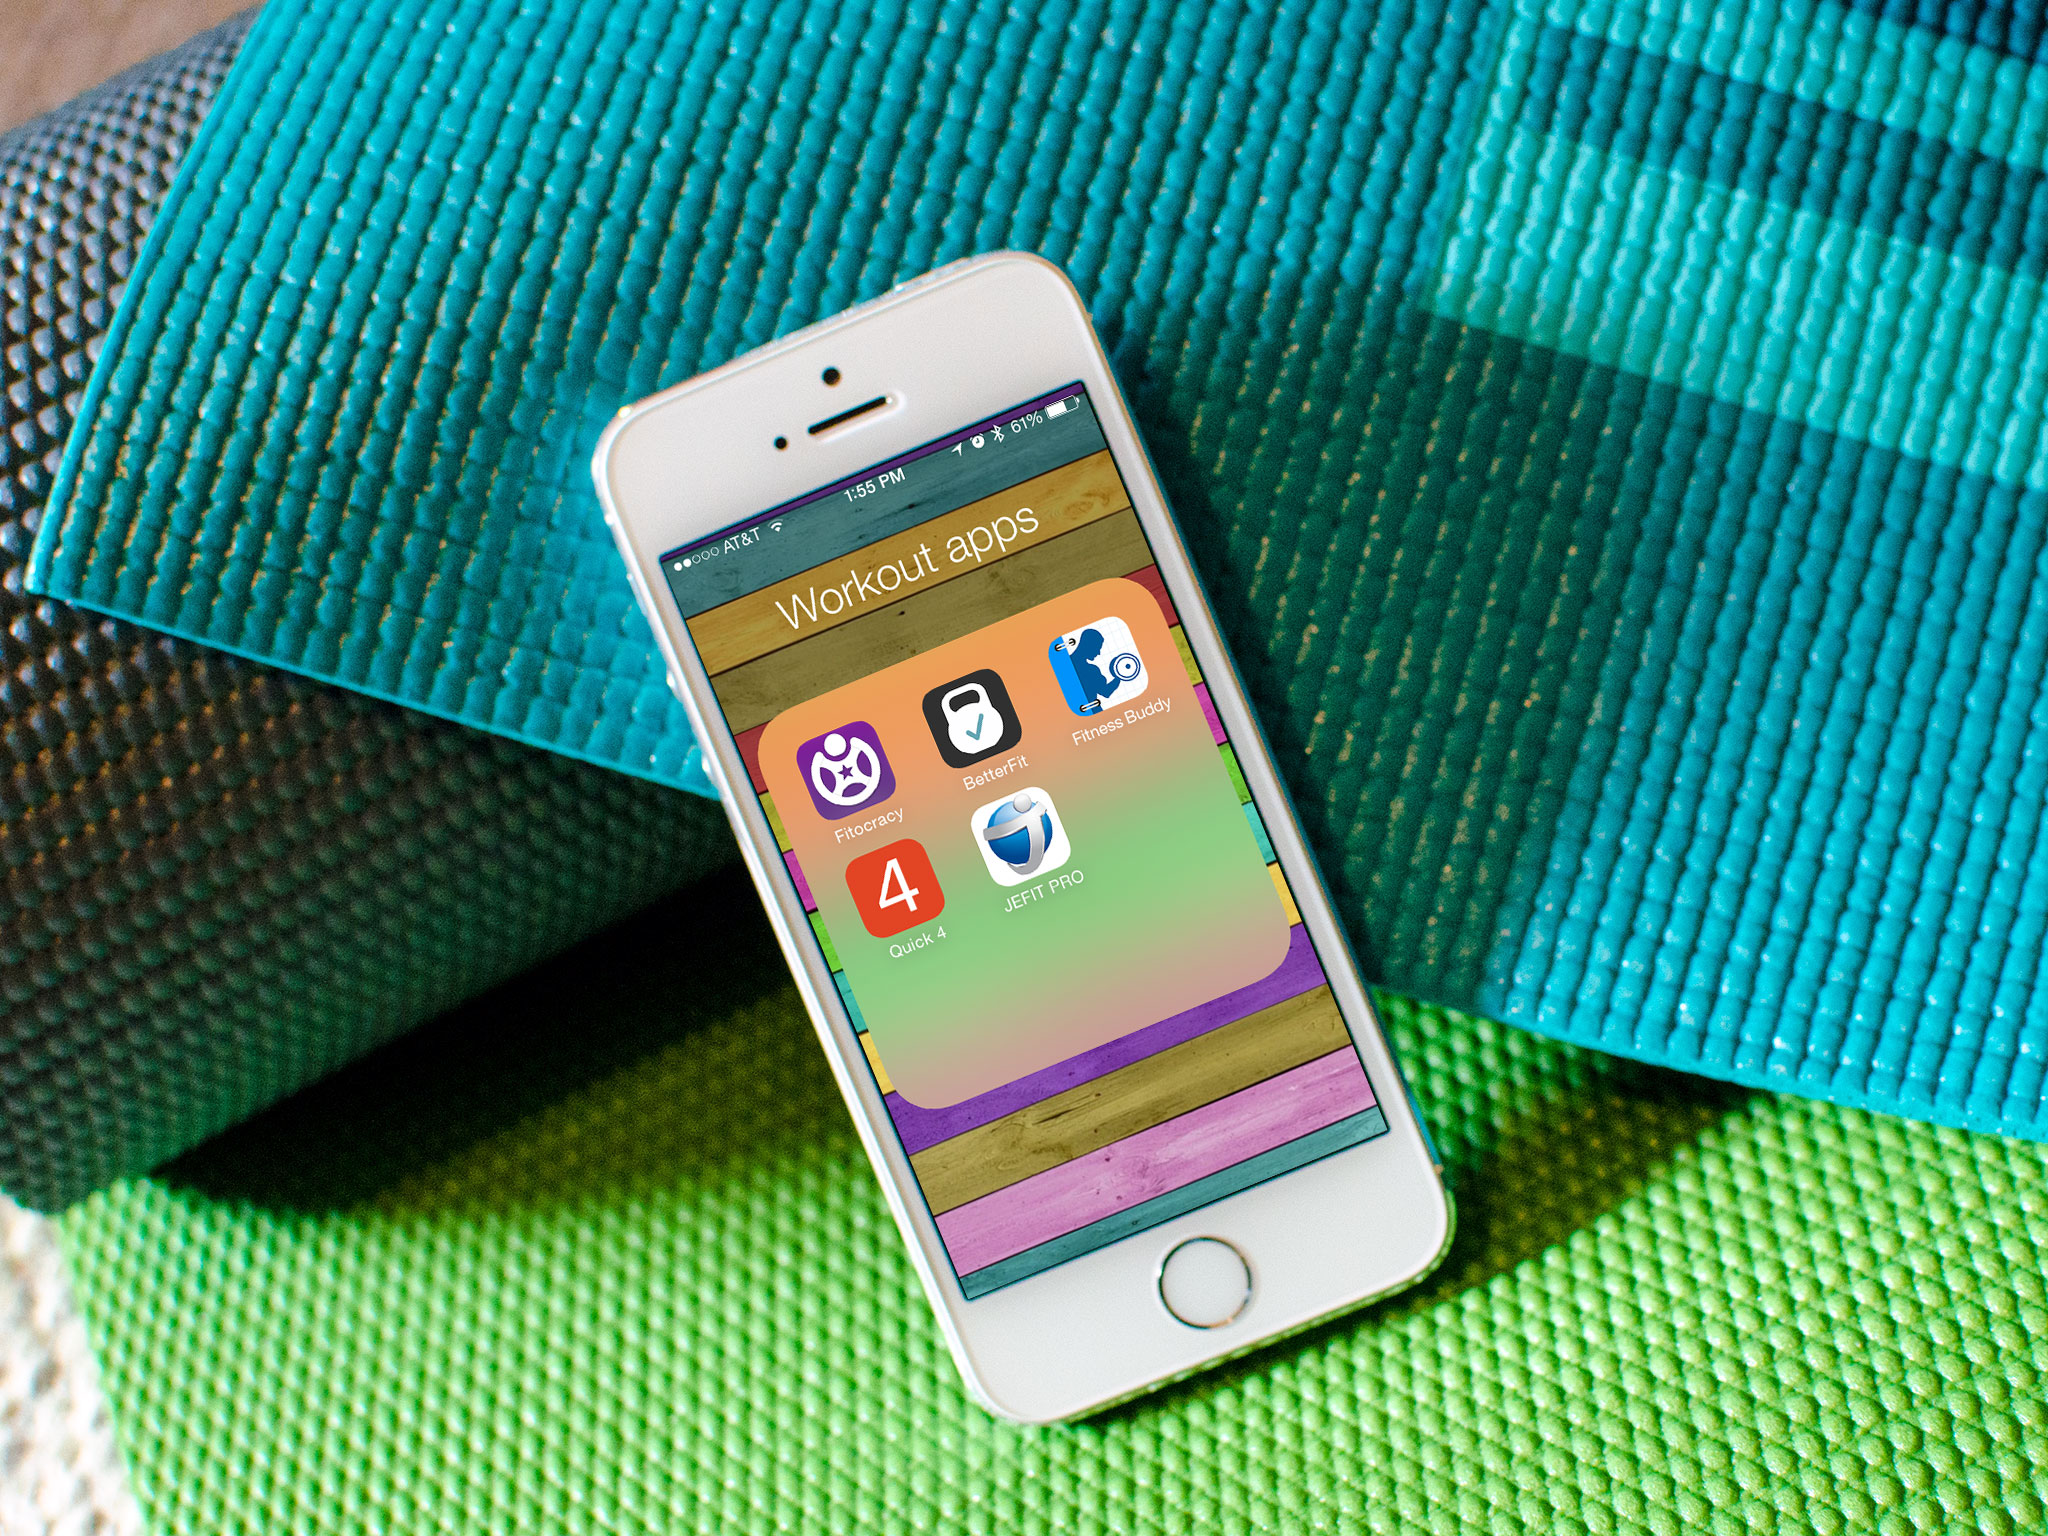 Best workout apps for iPhone: What you need to get in shape and feel great!